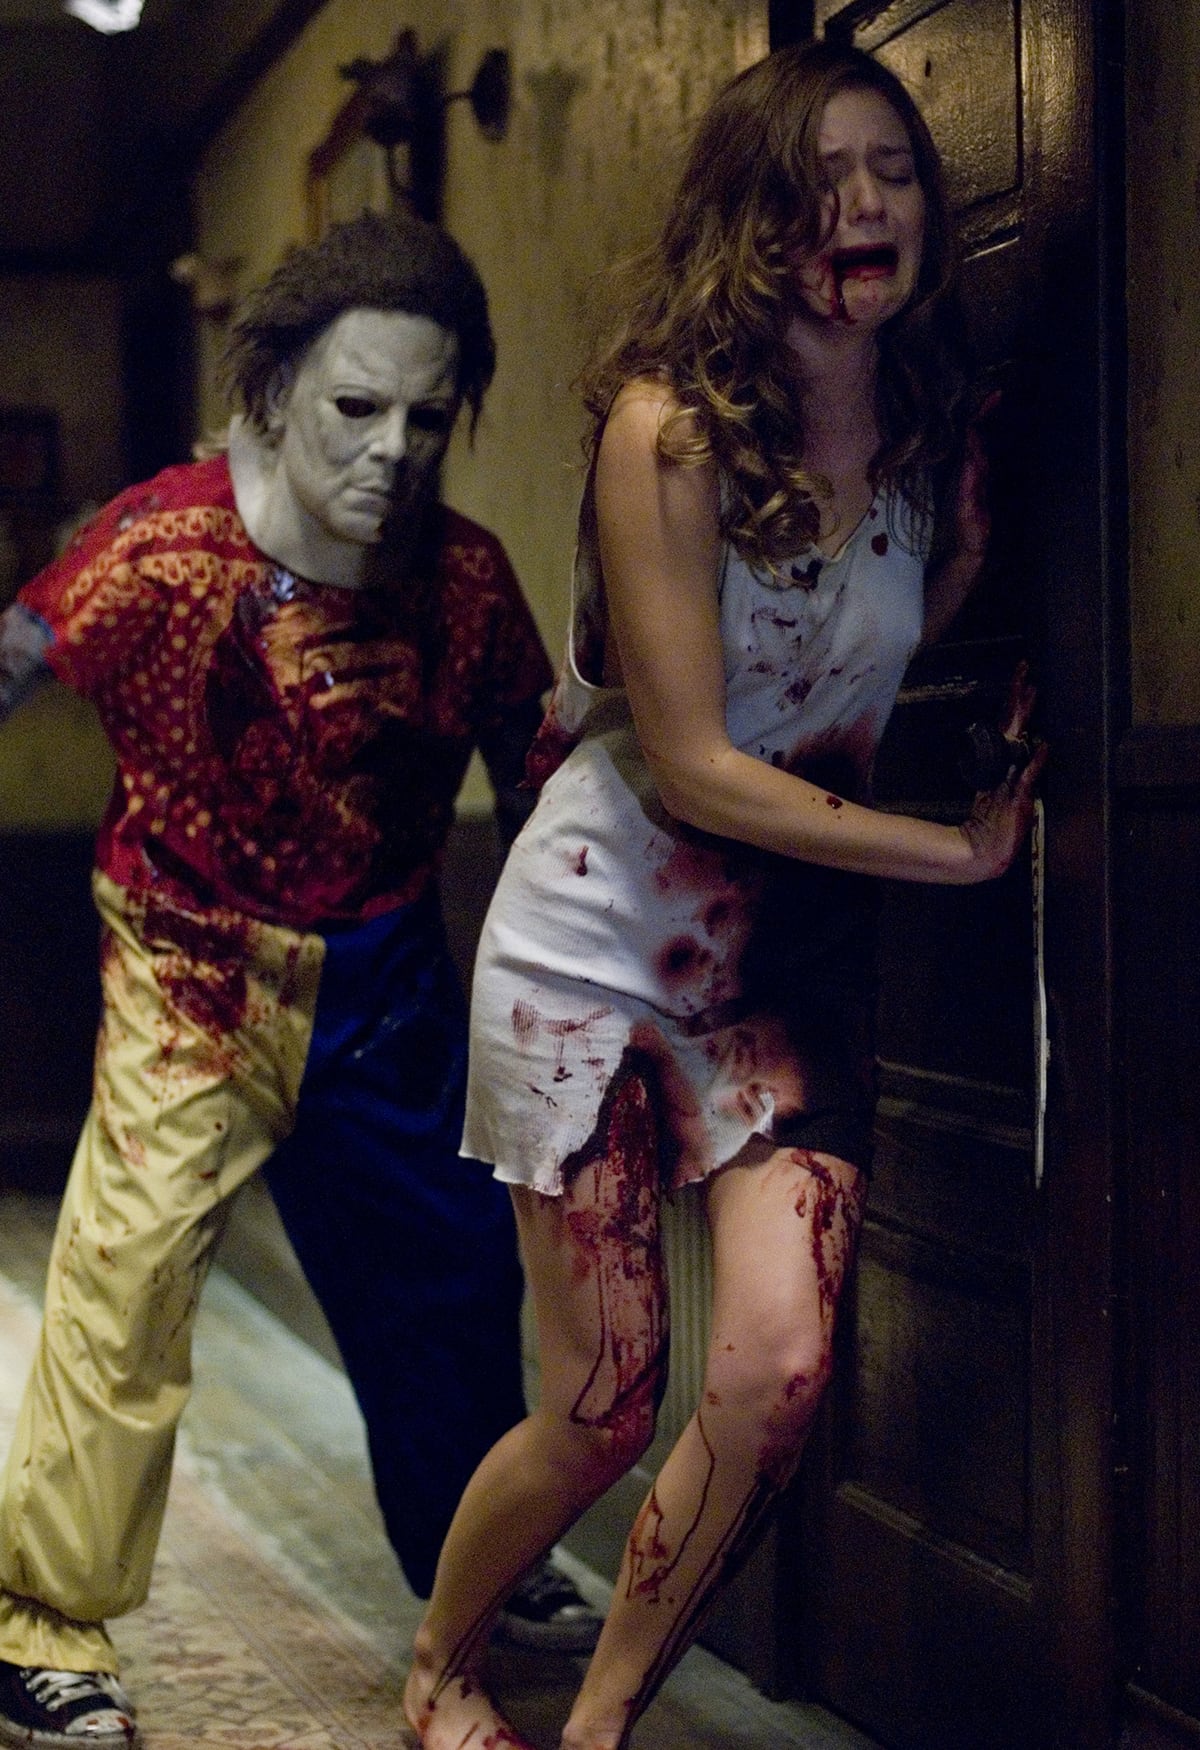 Hanna Hall broke into the public eye after playing Michael Myers' older sister, Judith Myers, in the 2007 slasher movie Halloween